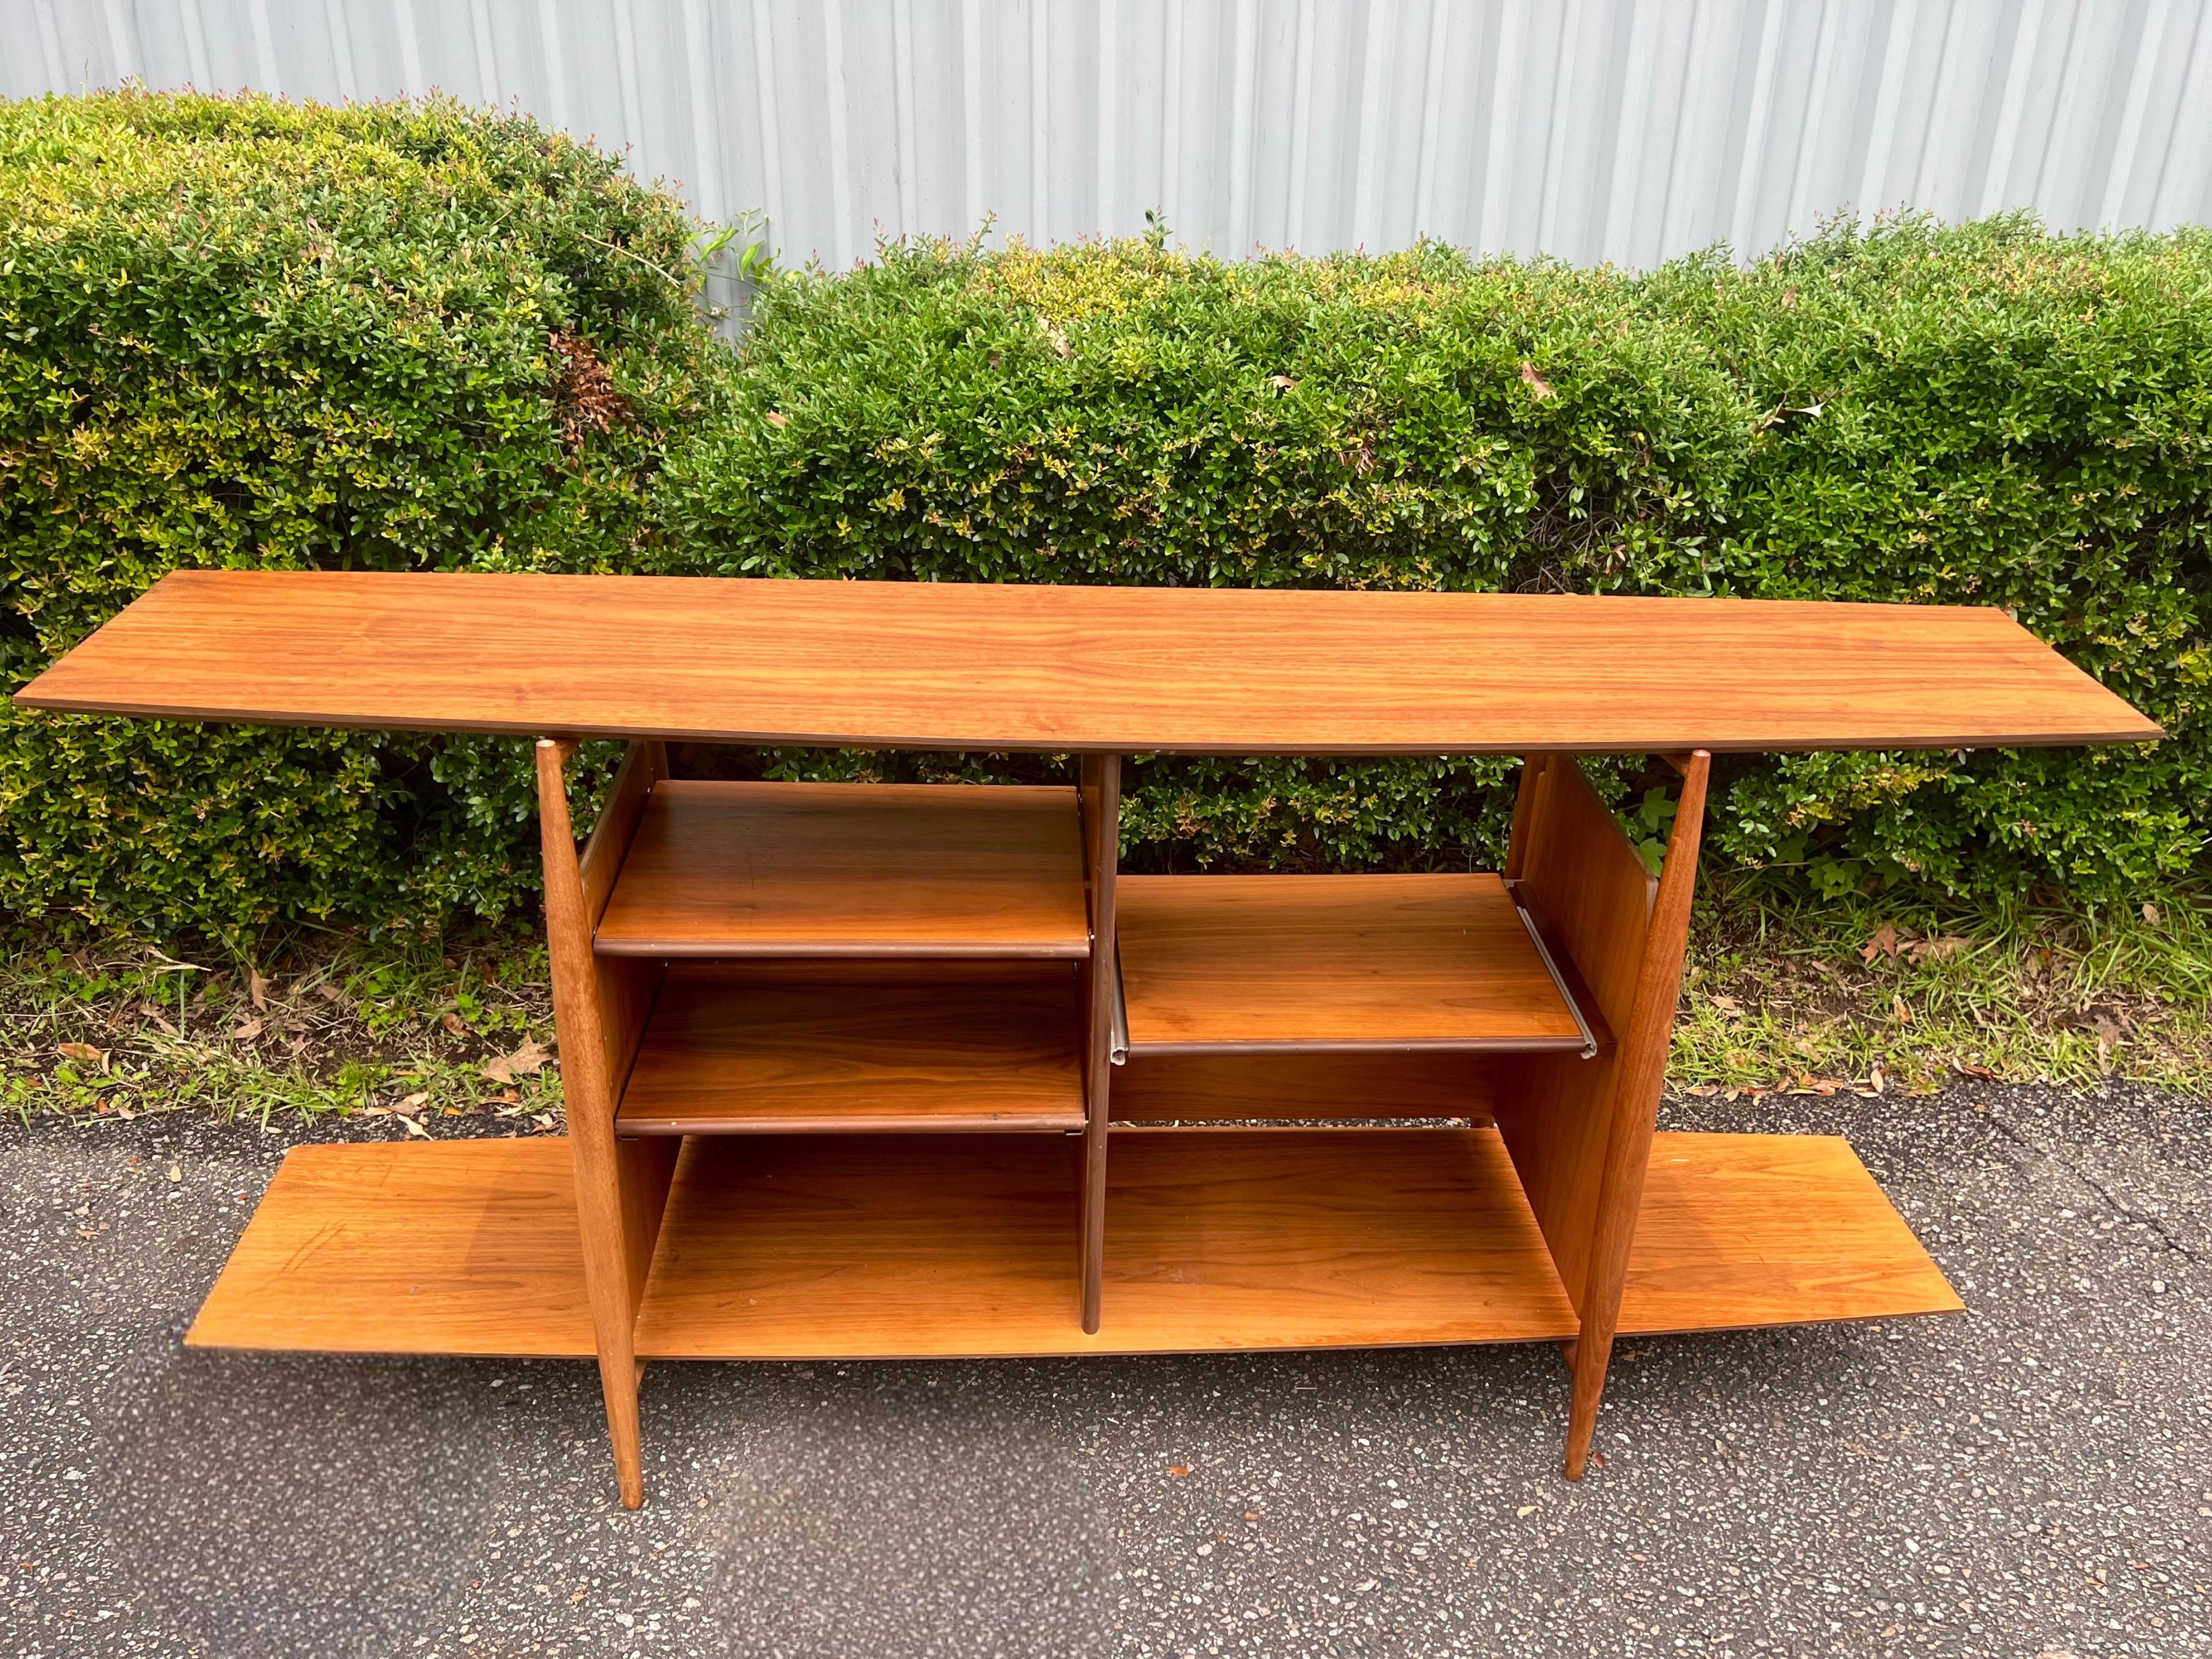 Fascinating two-tier bookshelf designed and manufactured in the United States circa 1960’s. This Mid-Century Modern piece offers plenty of room for storage making it versatile enough to be used as an entry way console as well. It suits any interior